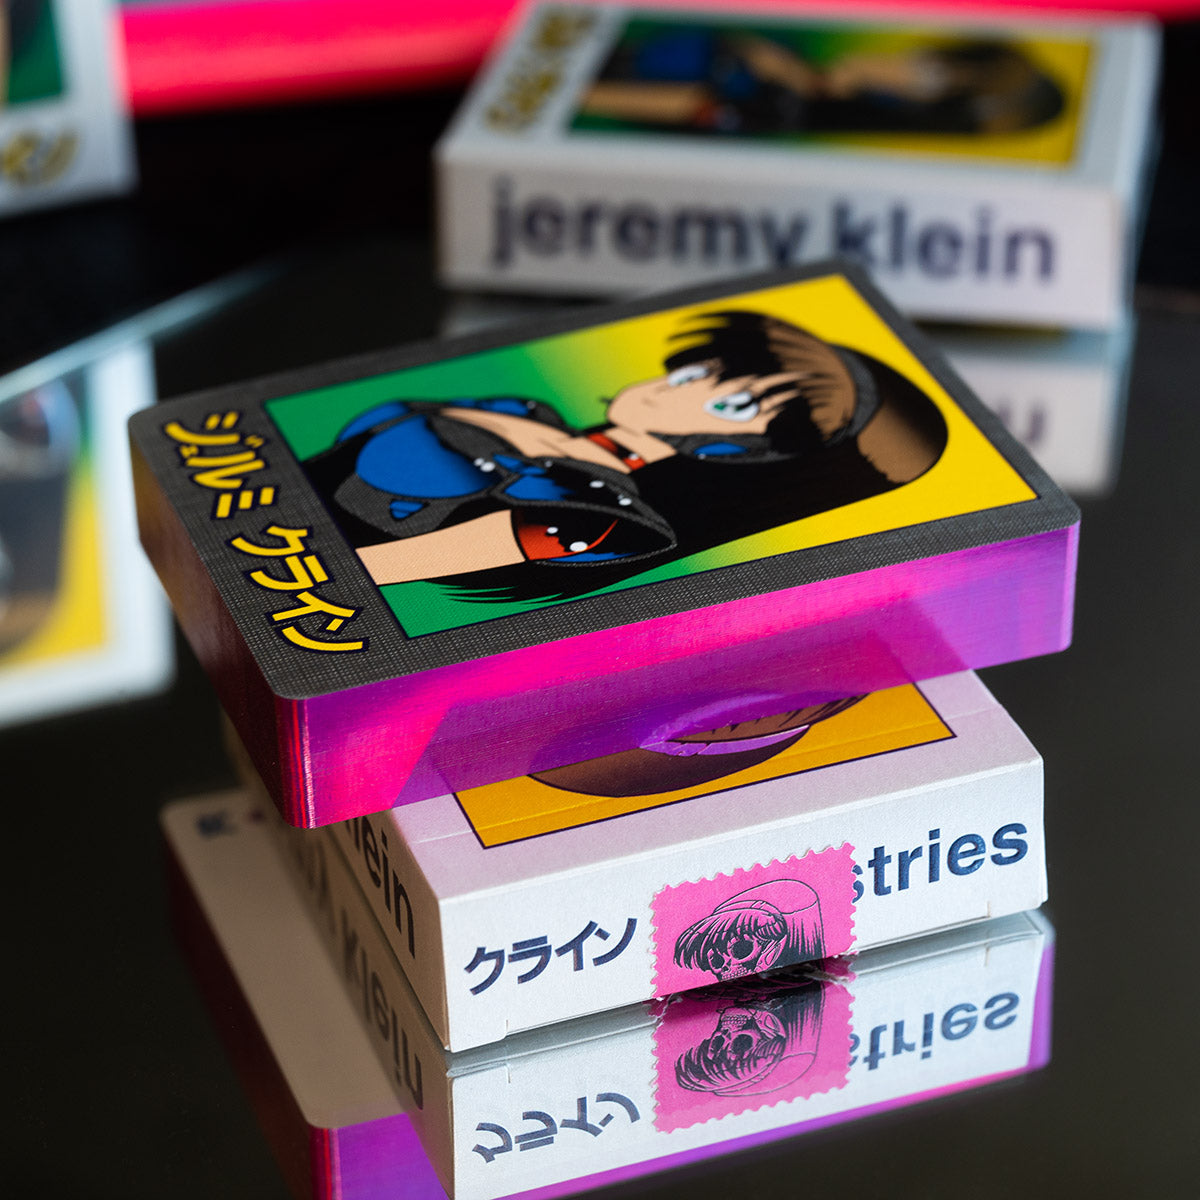 JEREMY KLEIN DREAM GIRL PLAYING CARDS SILVER FOIL LIMITED GILDED EDITION